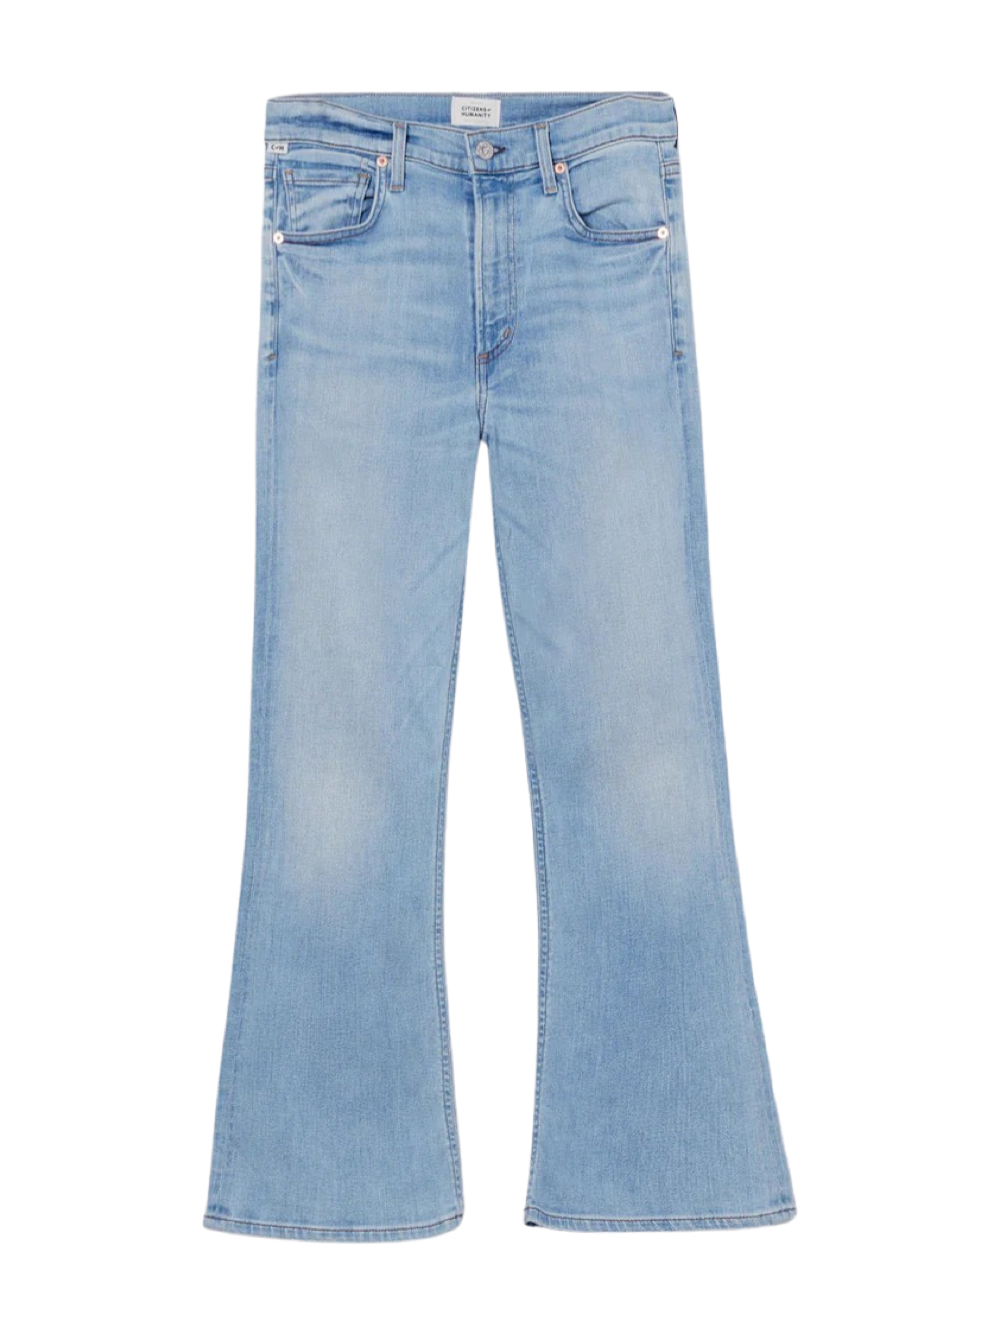 Citizens of Humanity Isola Flare Jeans in Marquee